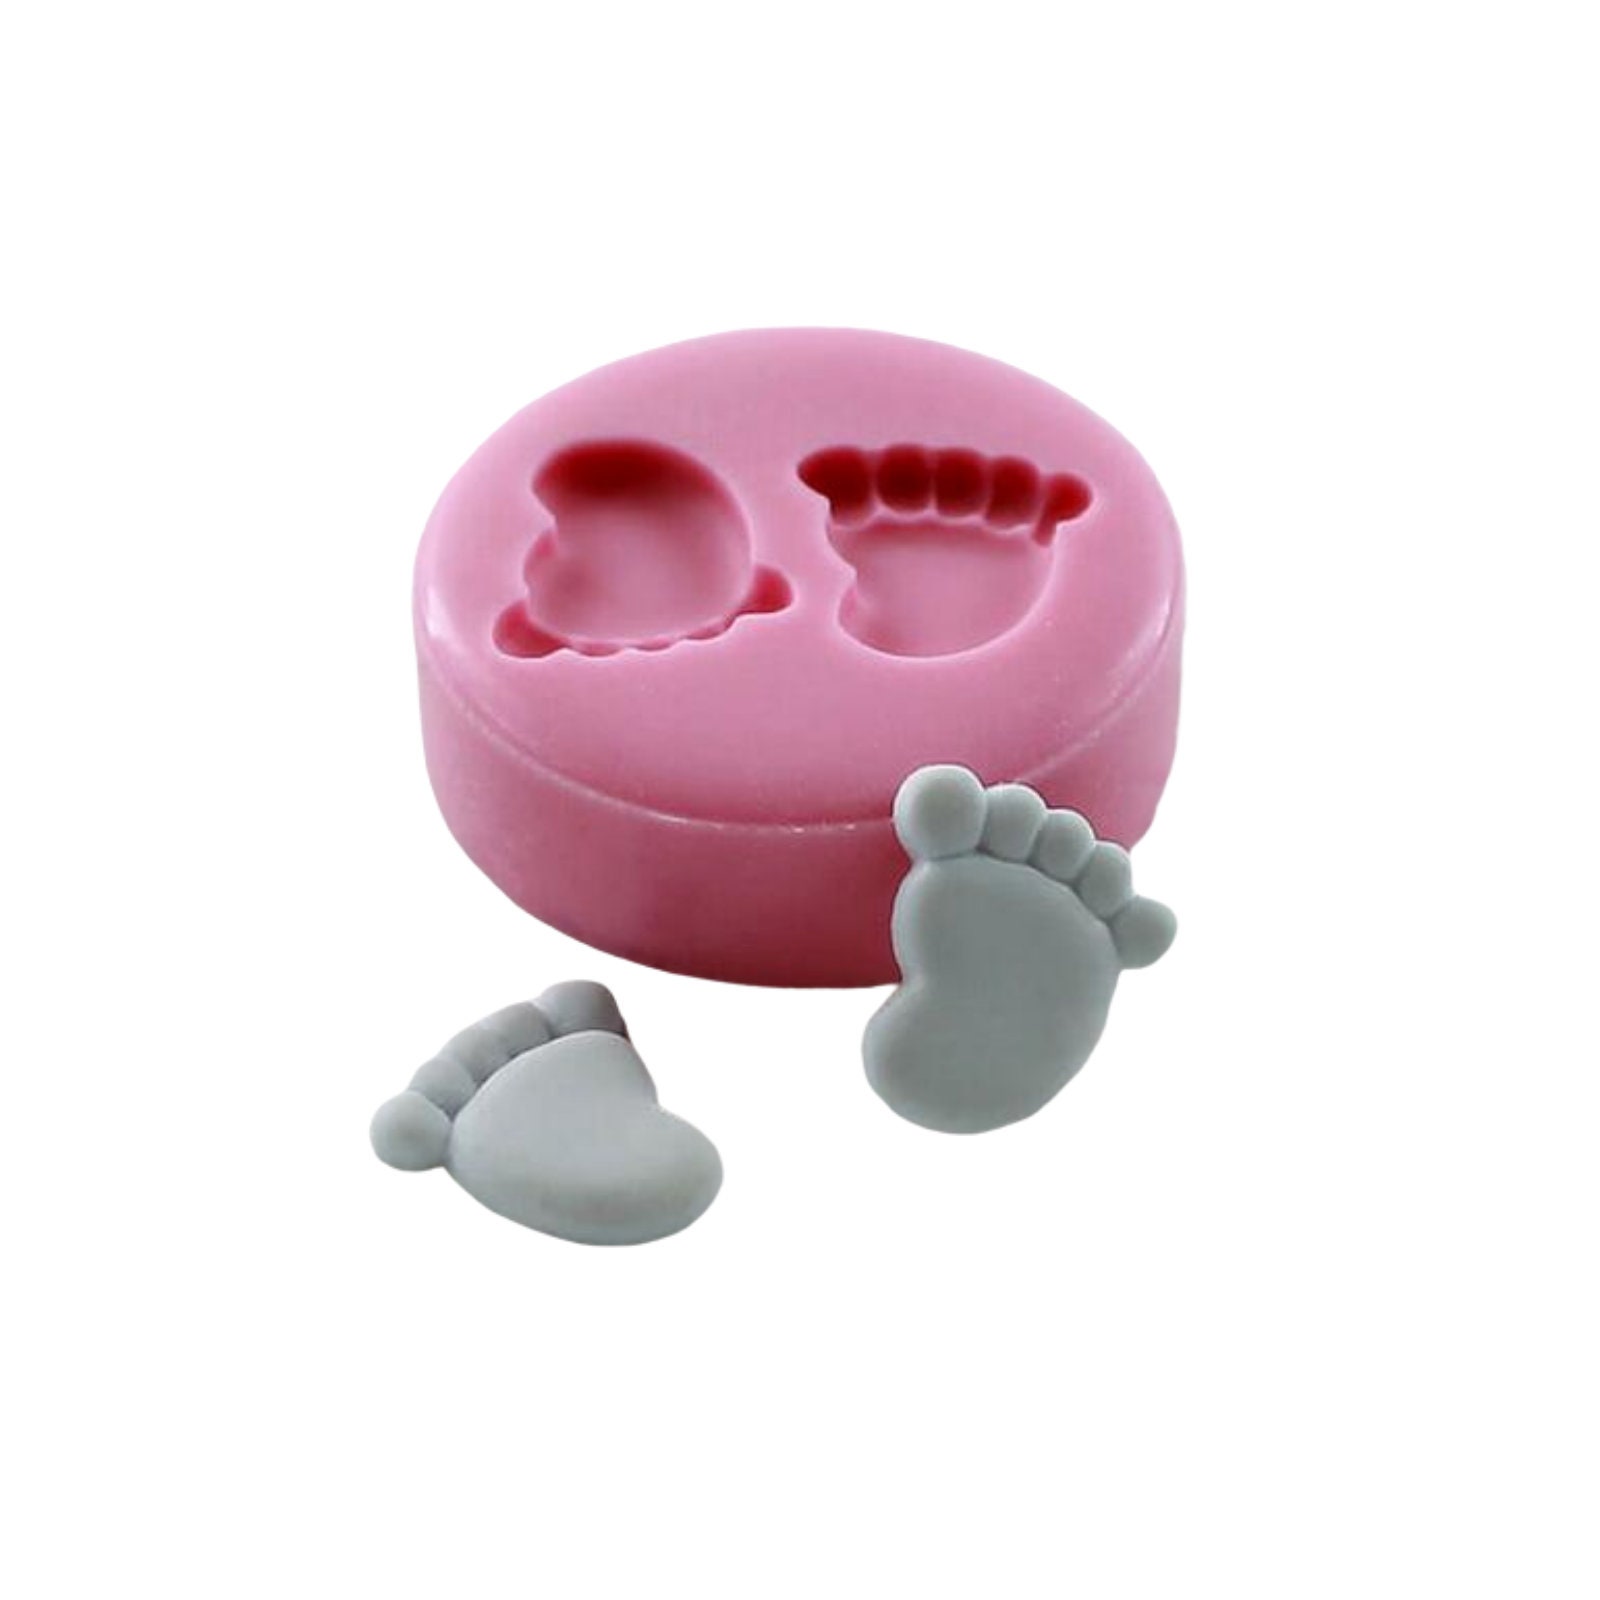 ZiXiang Baby Silicone Fondant Mold Baby Shower Themed Cake Fondant Molds  Baby Feet Chocolate Mold For Baby Birthday Party Cake Decorating Cupcake